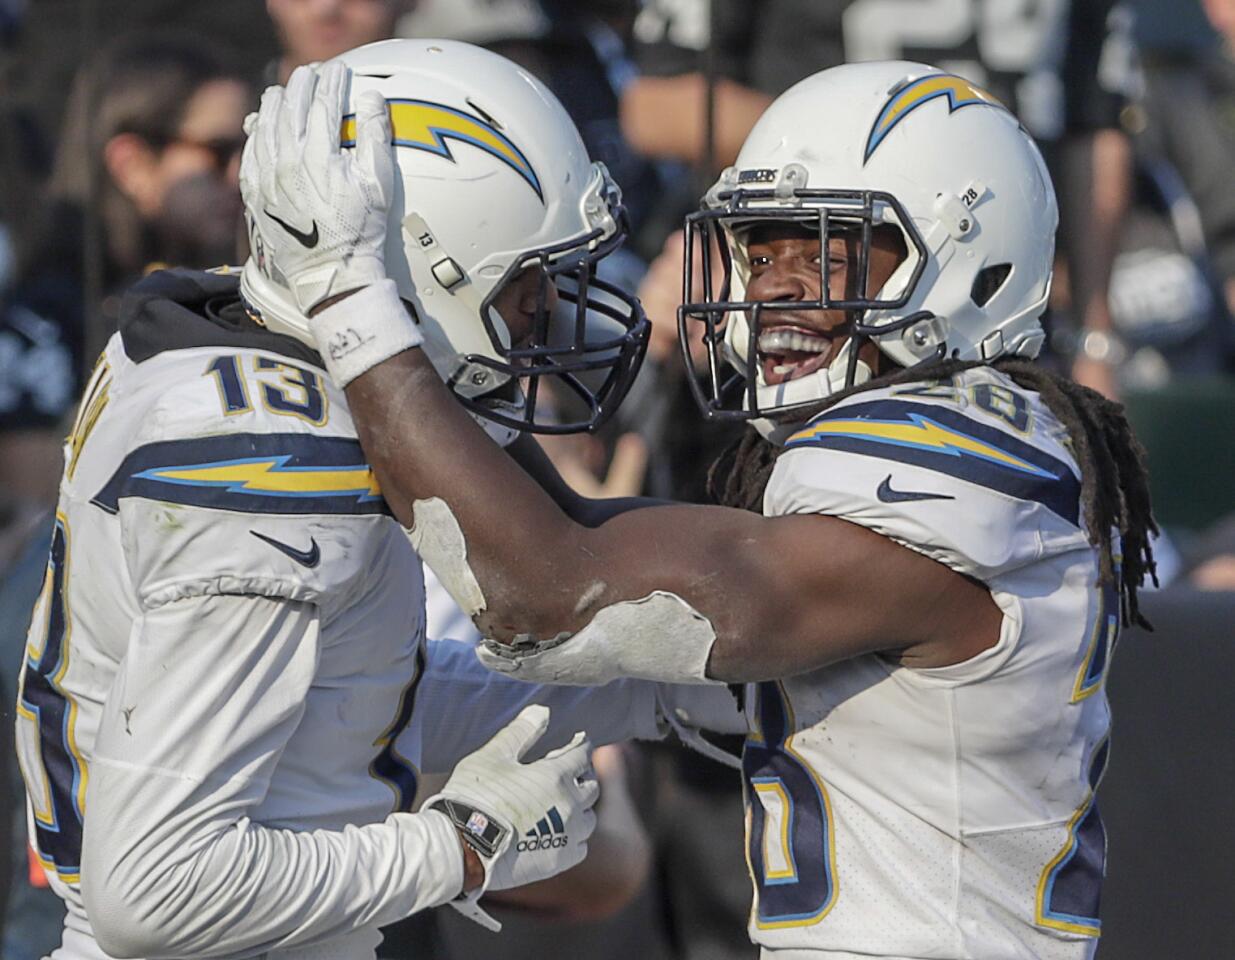 Chargers running back Melvin Gordon III celebrates with teammate Keenan Allen after scoring a touchdown early in the third quarter at Oakland-Alameda County Coliseum on Sunday.